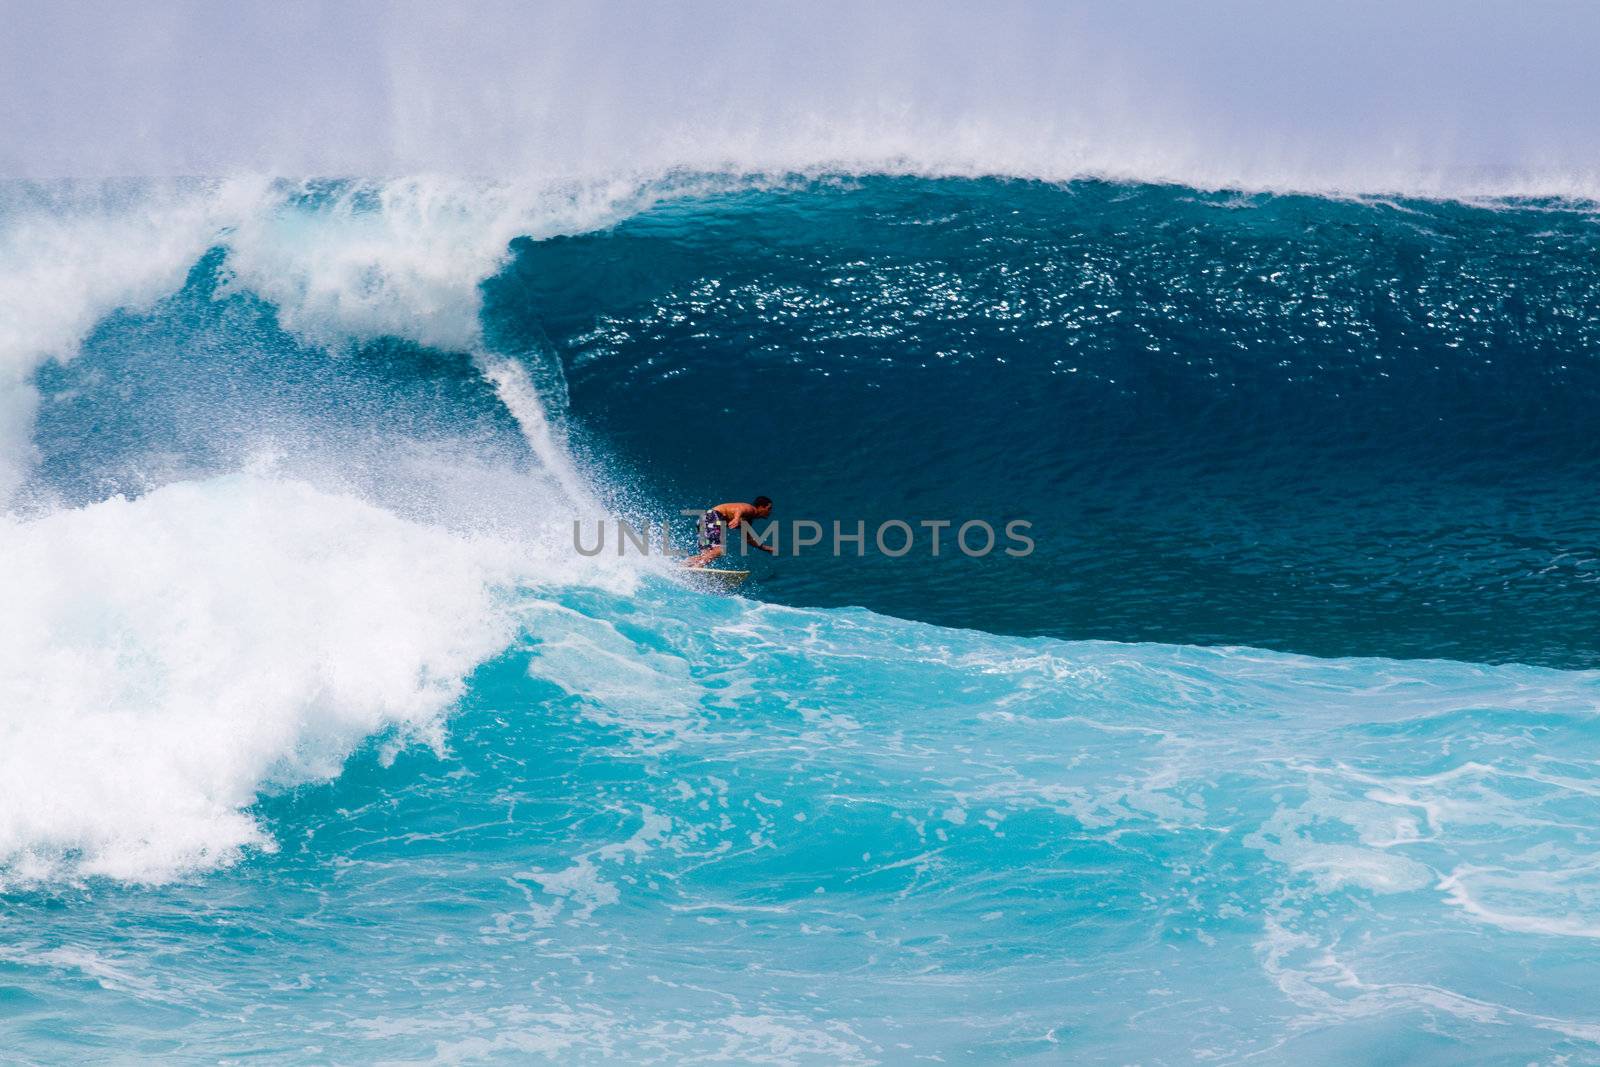 A surfer gets out in front of an enormous wave on the north shore of Hawaii Oahu.